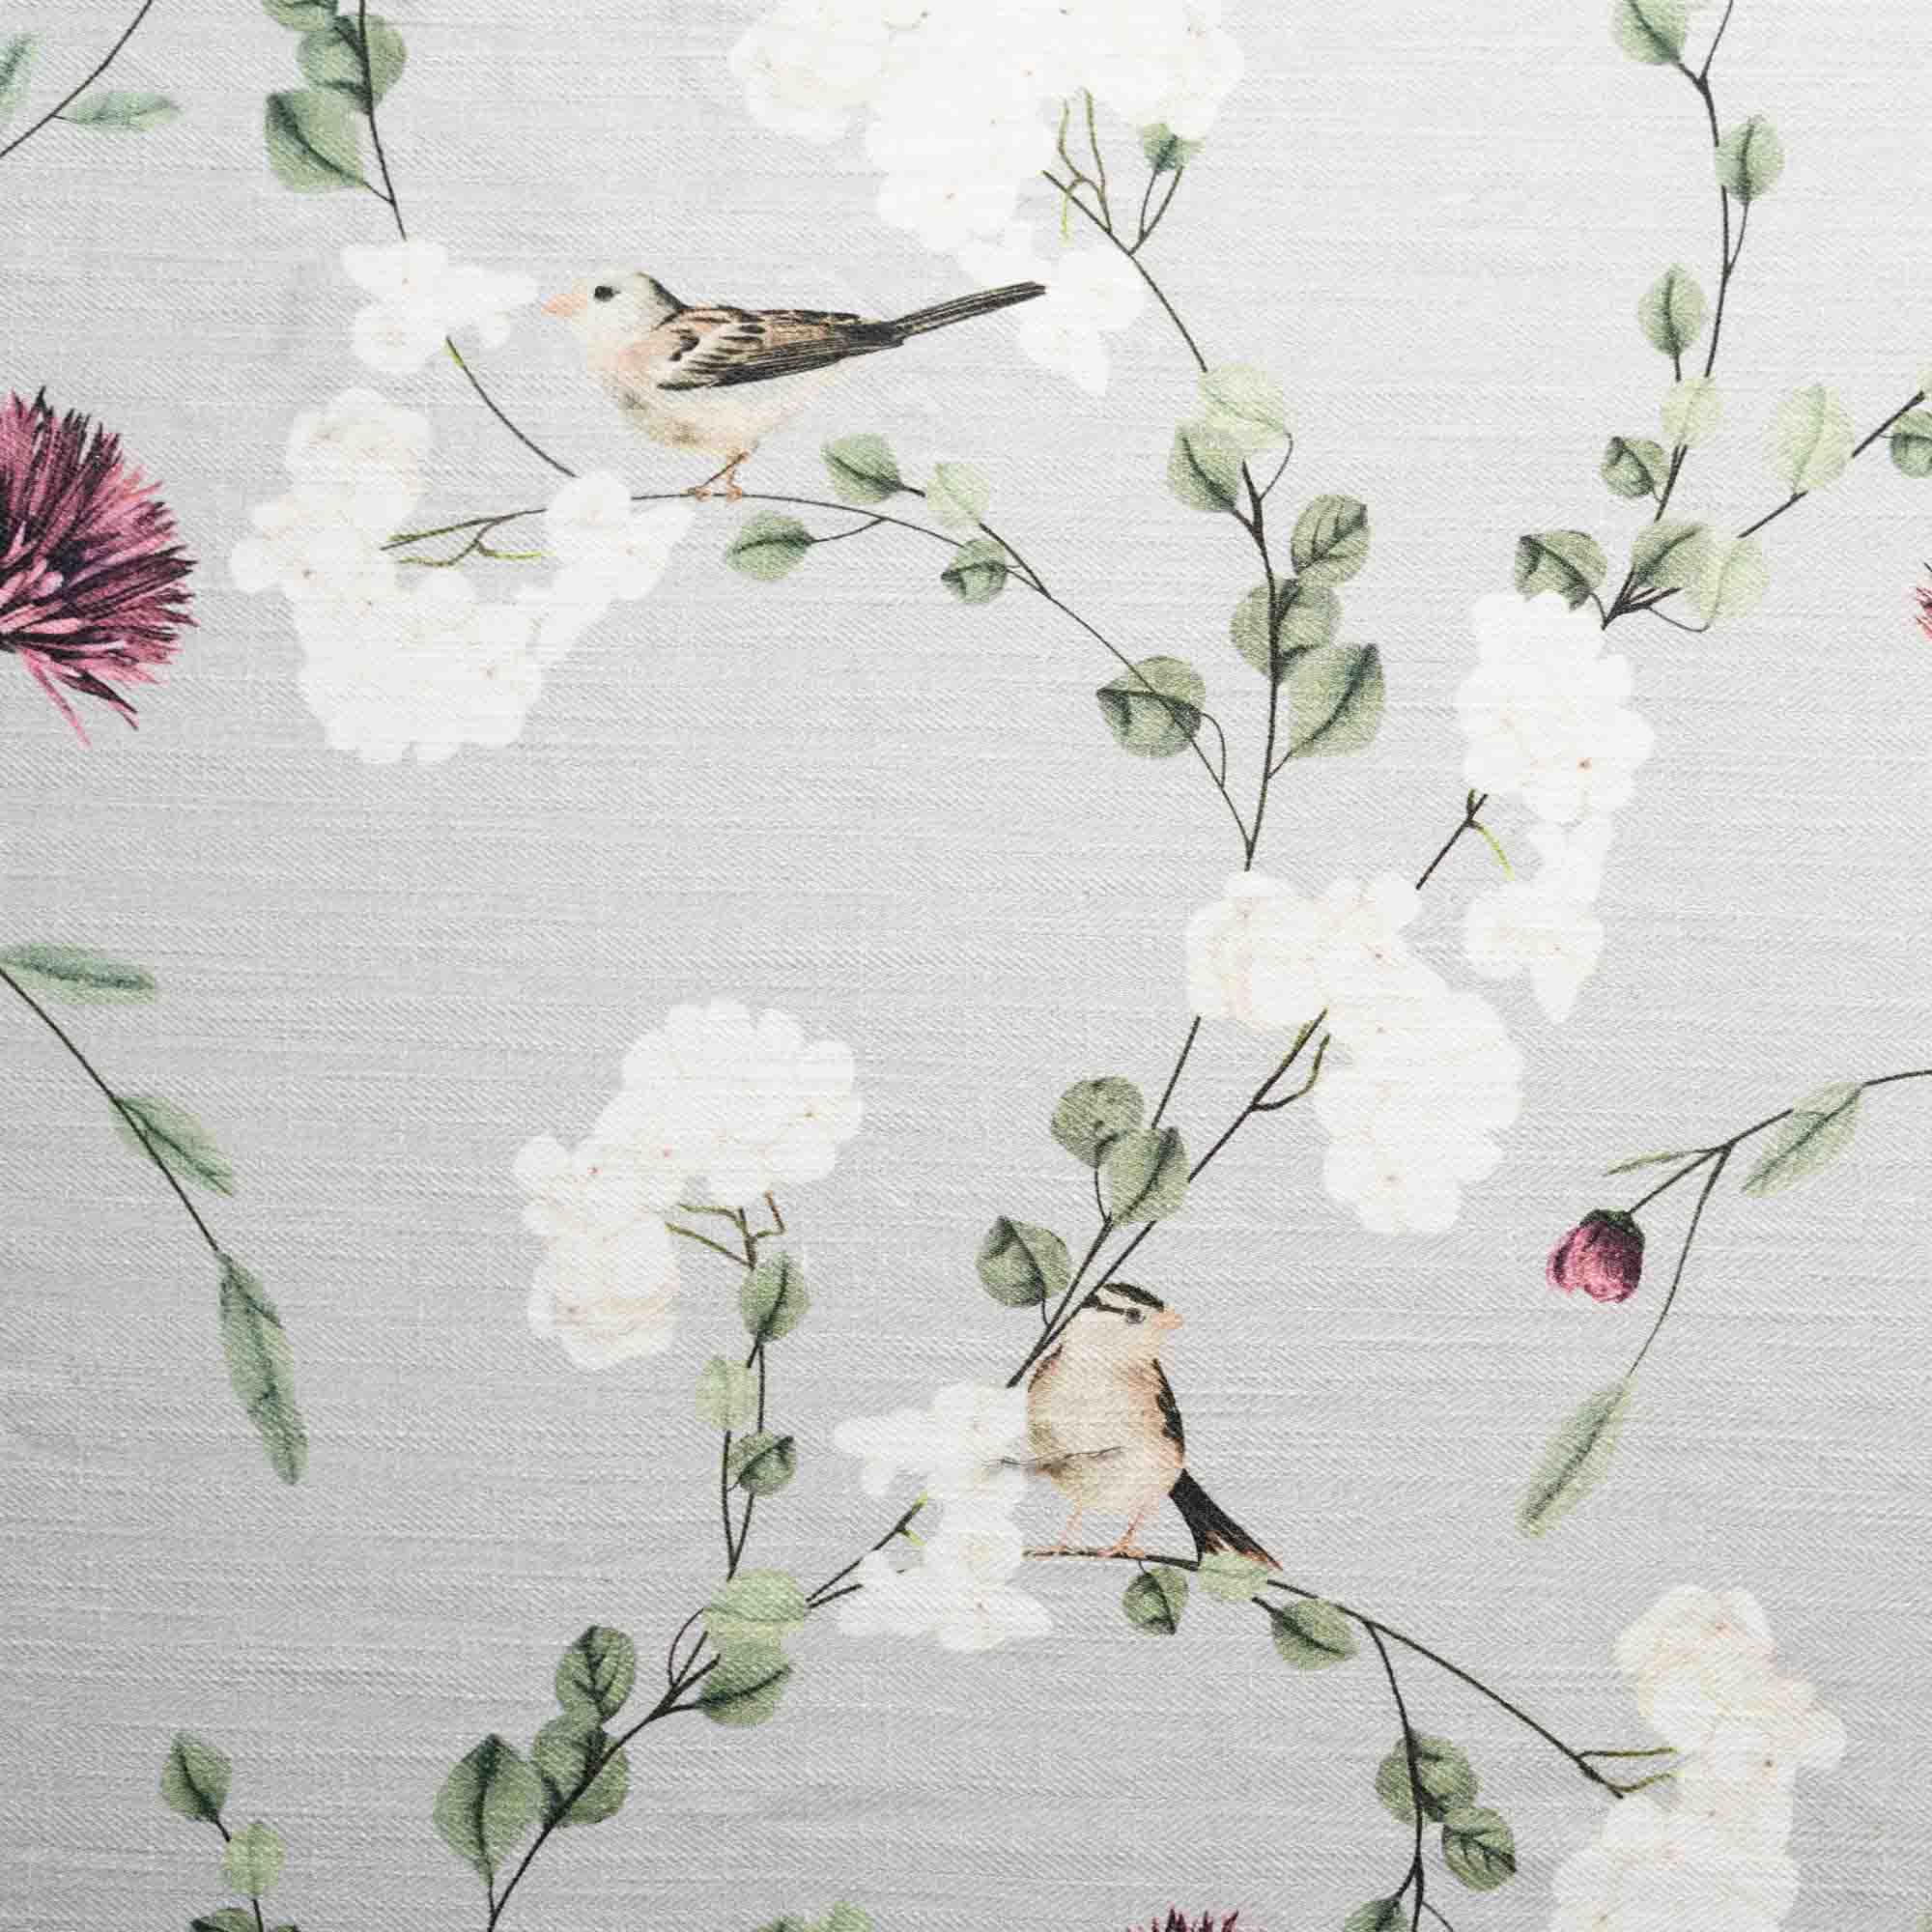 Chrysanthemums and Sparrows Breeze Cotton Linen Blend Fabric (Horizontal Repeat)